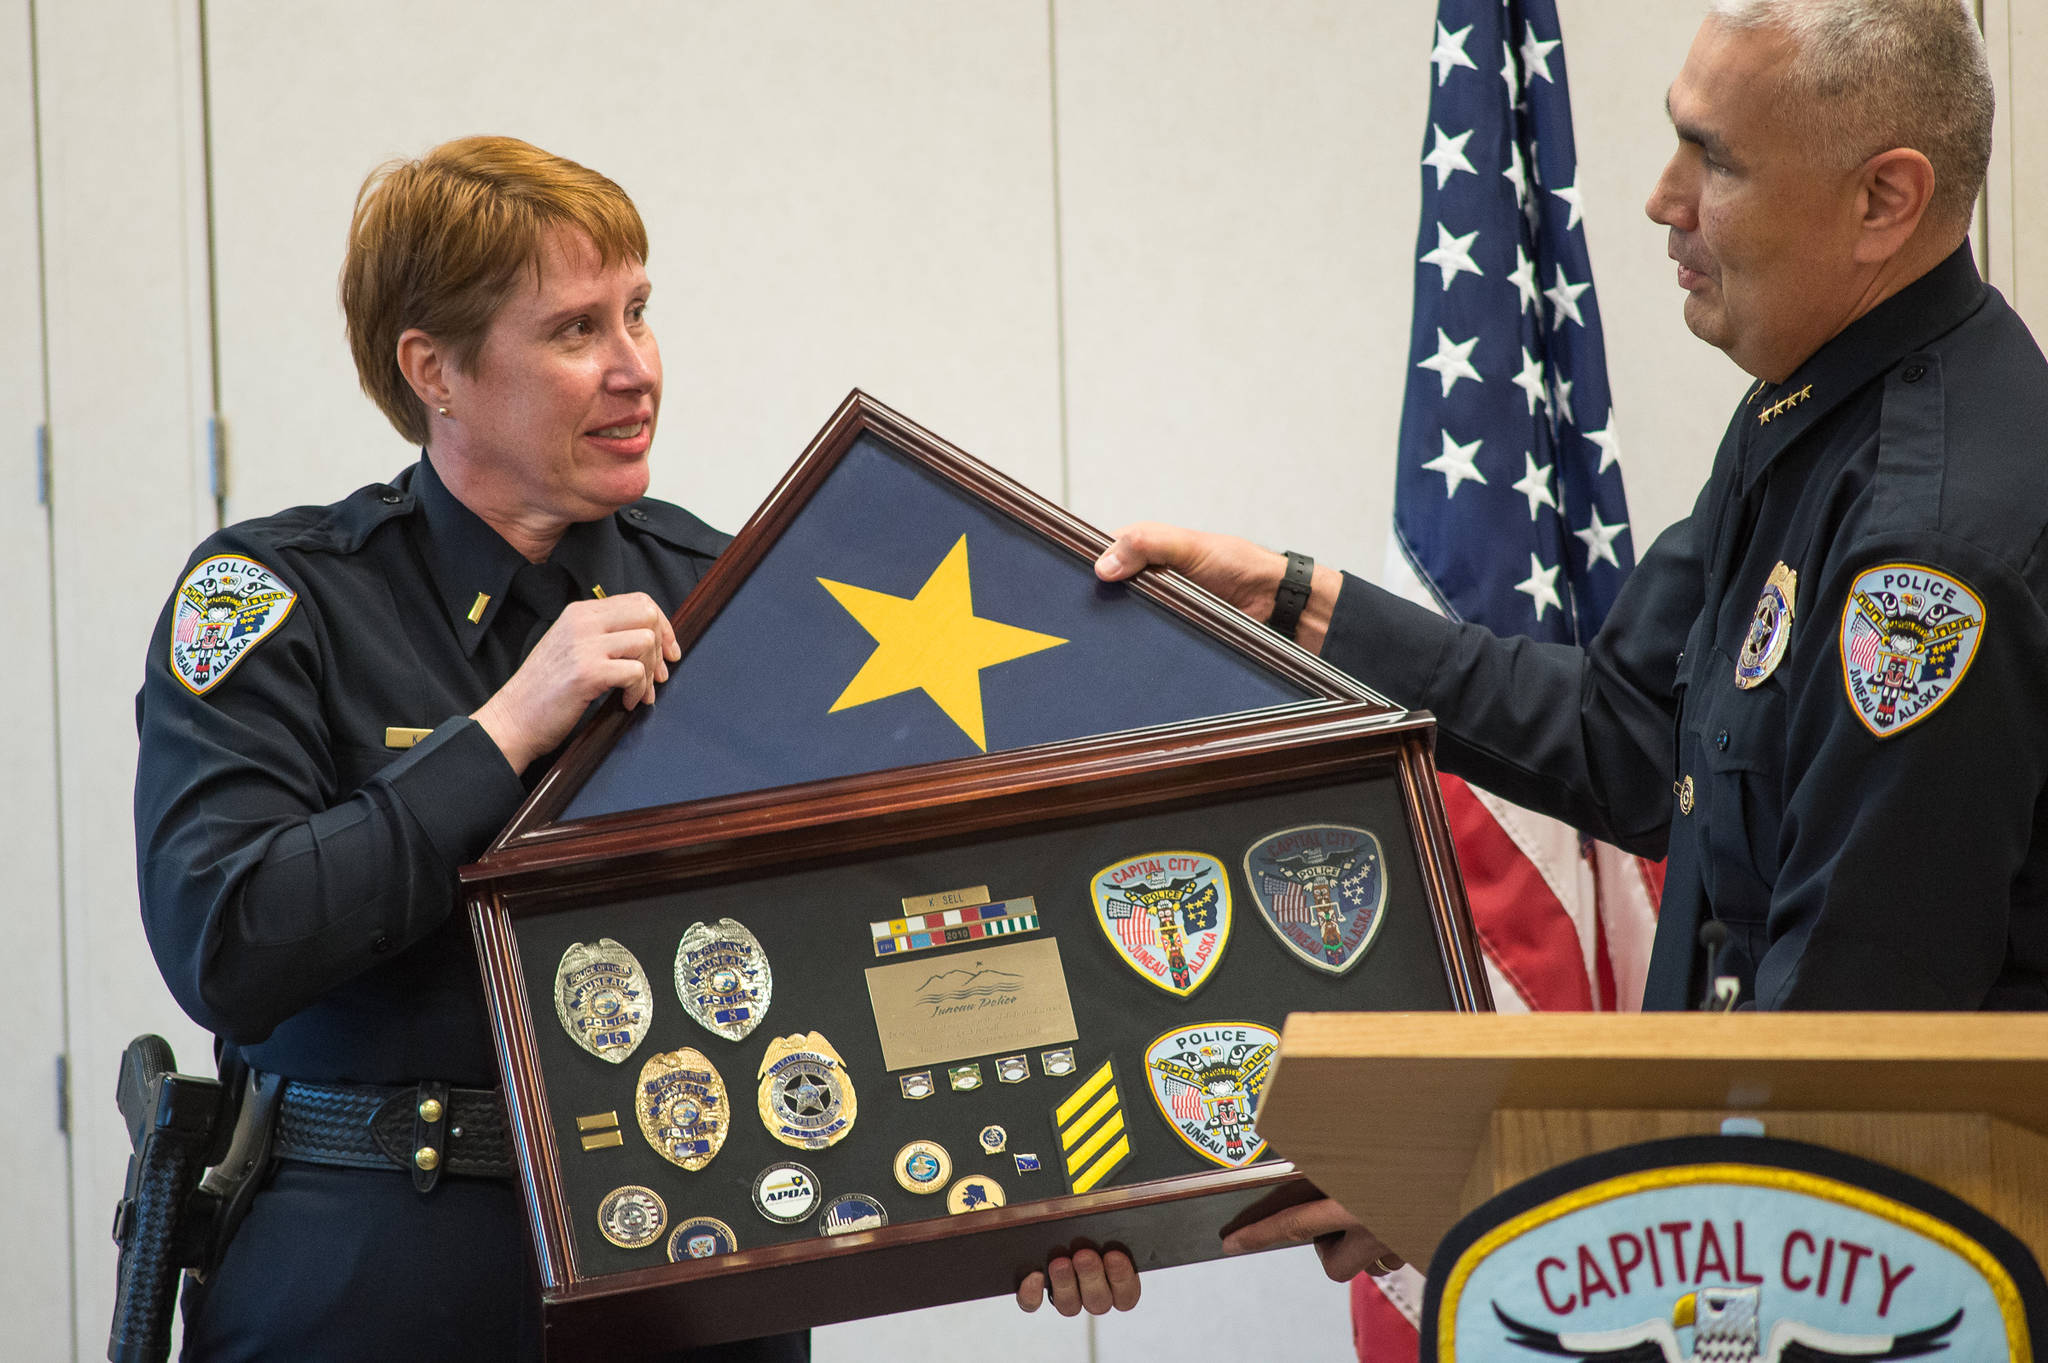 Lt. Kris Sell receives a framed case of her badges and awards from Police Chief Ed Mercer at her retirement party at the Juneau Police Department on Thursday, Aug. 31, 2017. Sell started as a patrol officer in 1997.